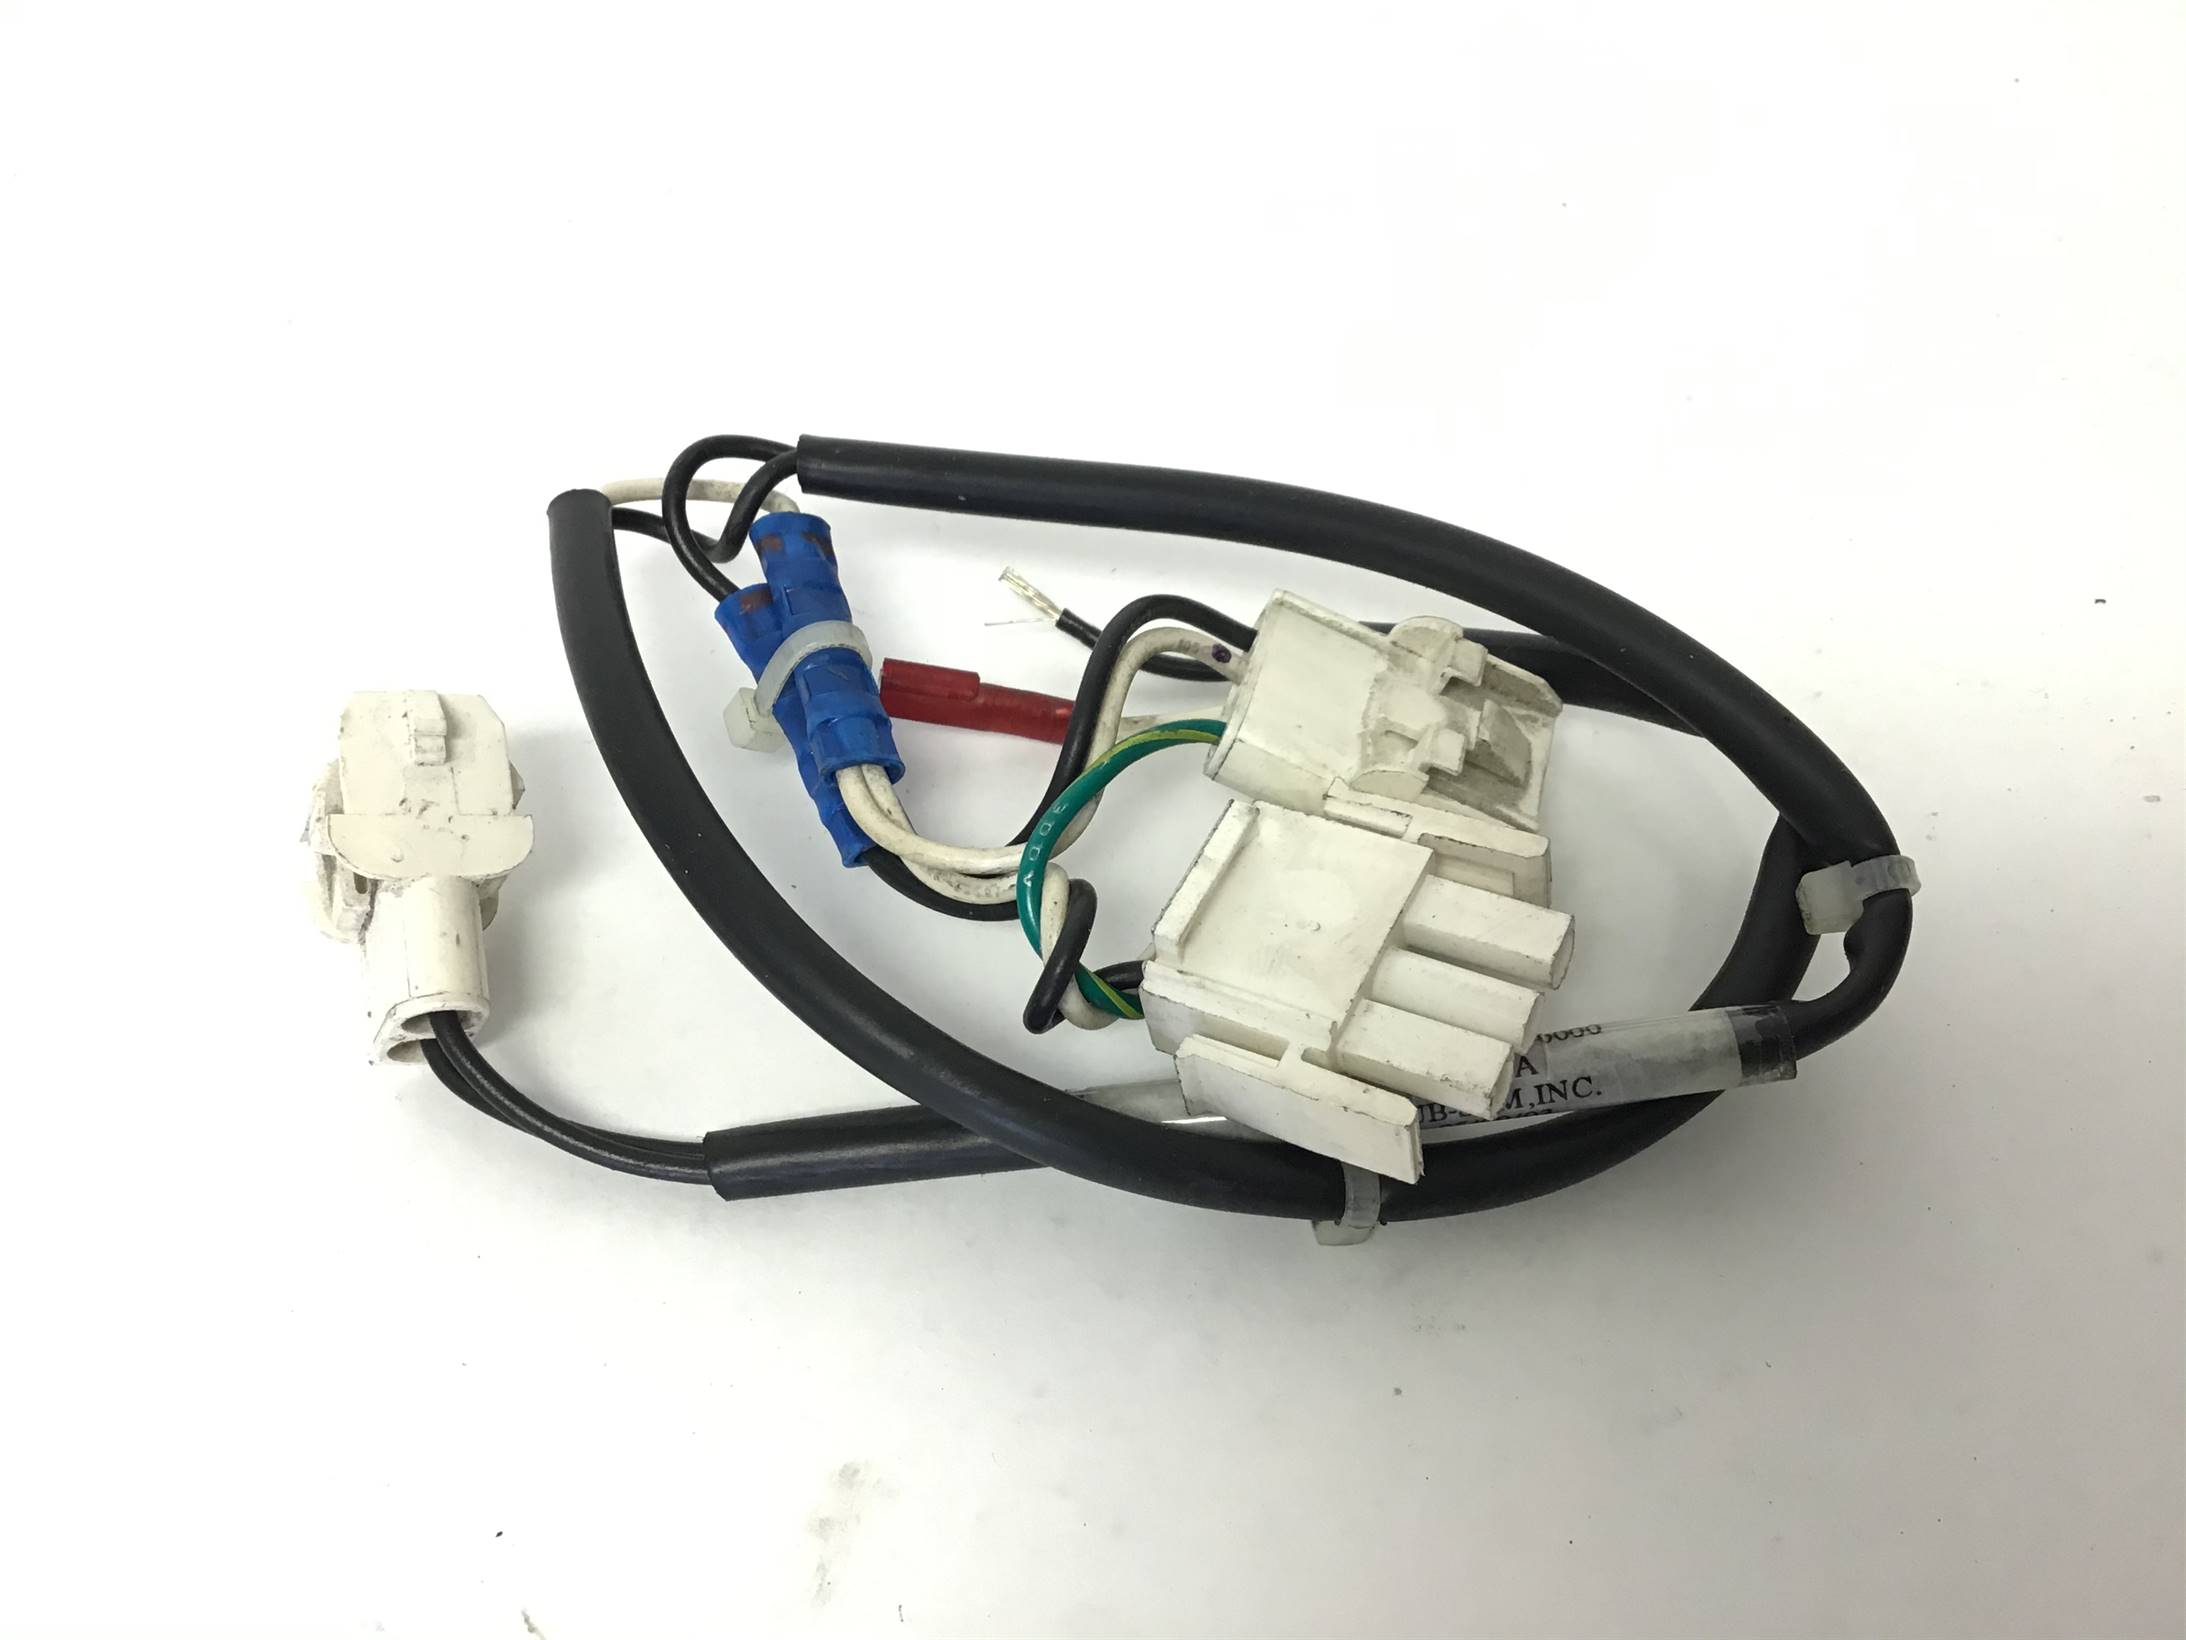 Fan Cable Wire Harness Assembly(used)